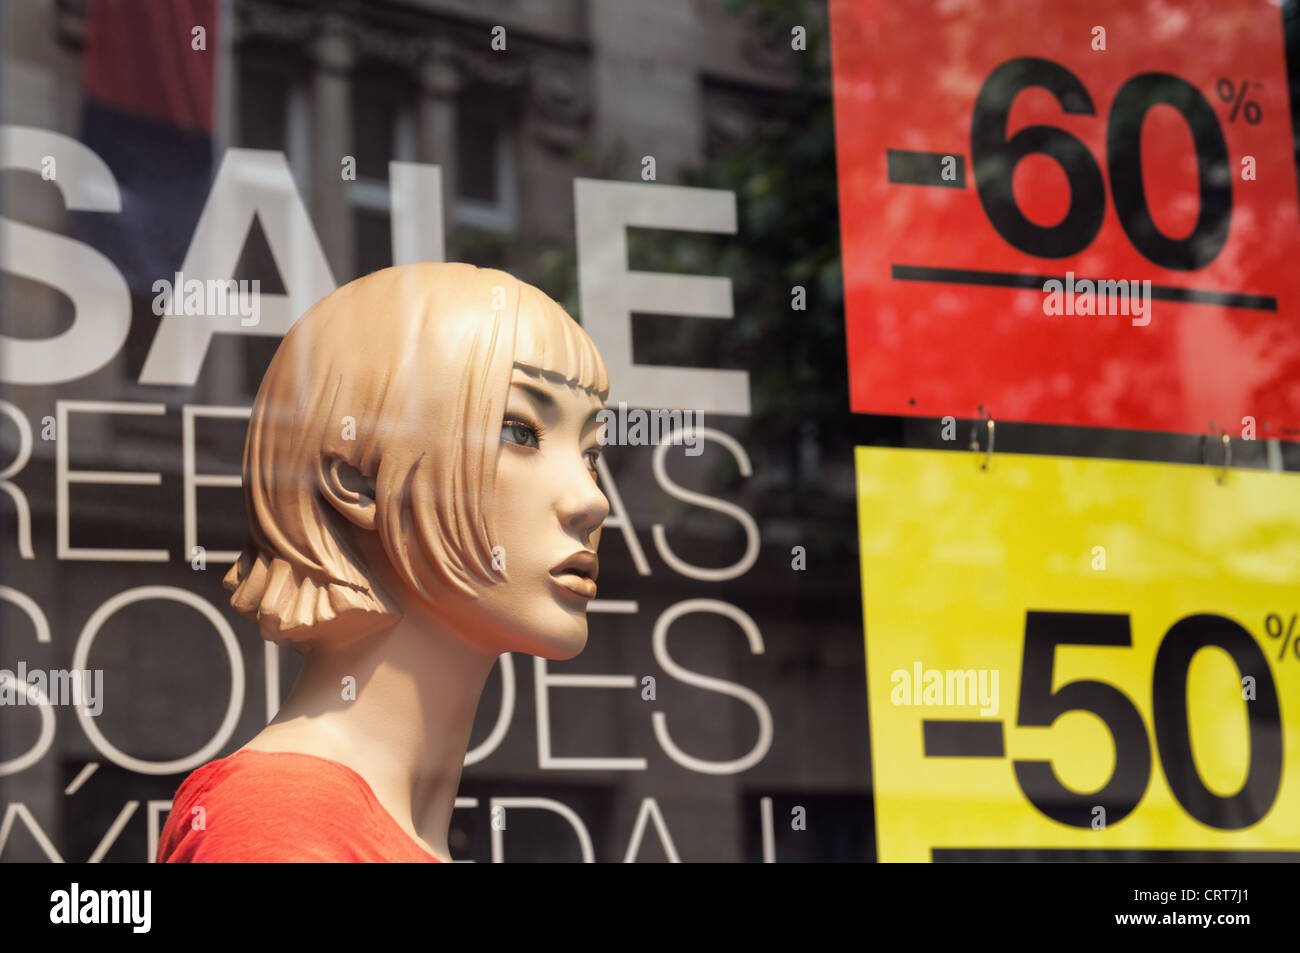 Discount signs in a shop window. Stock Photo